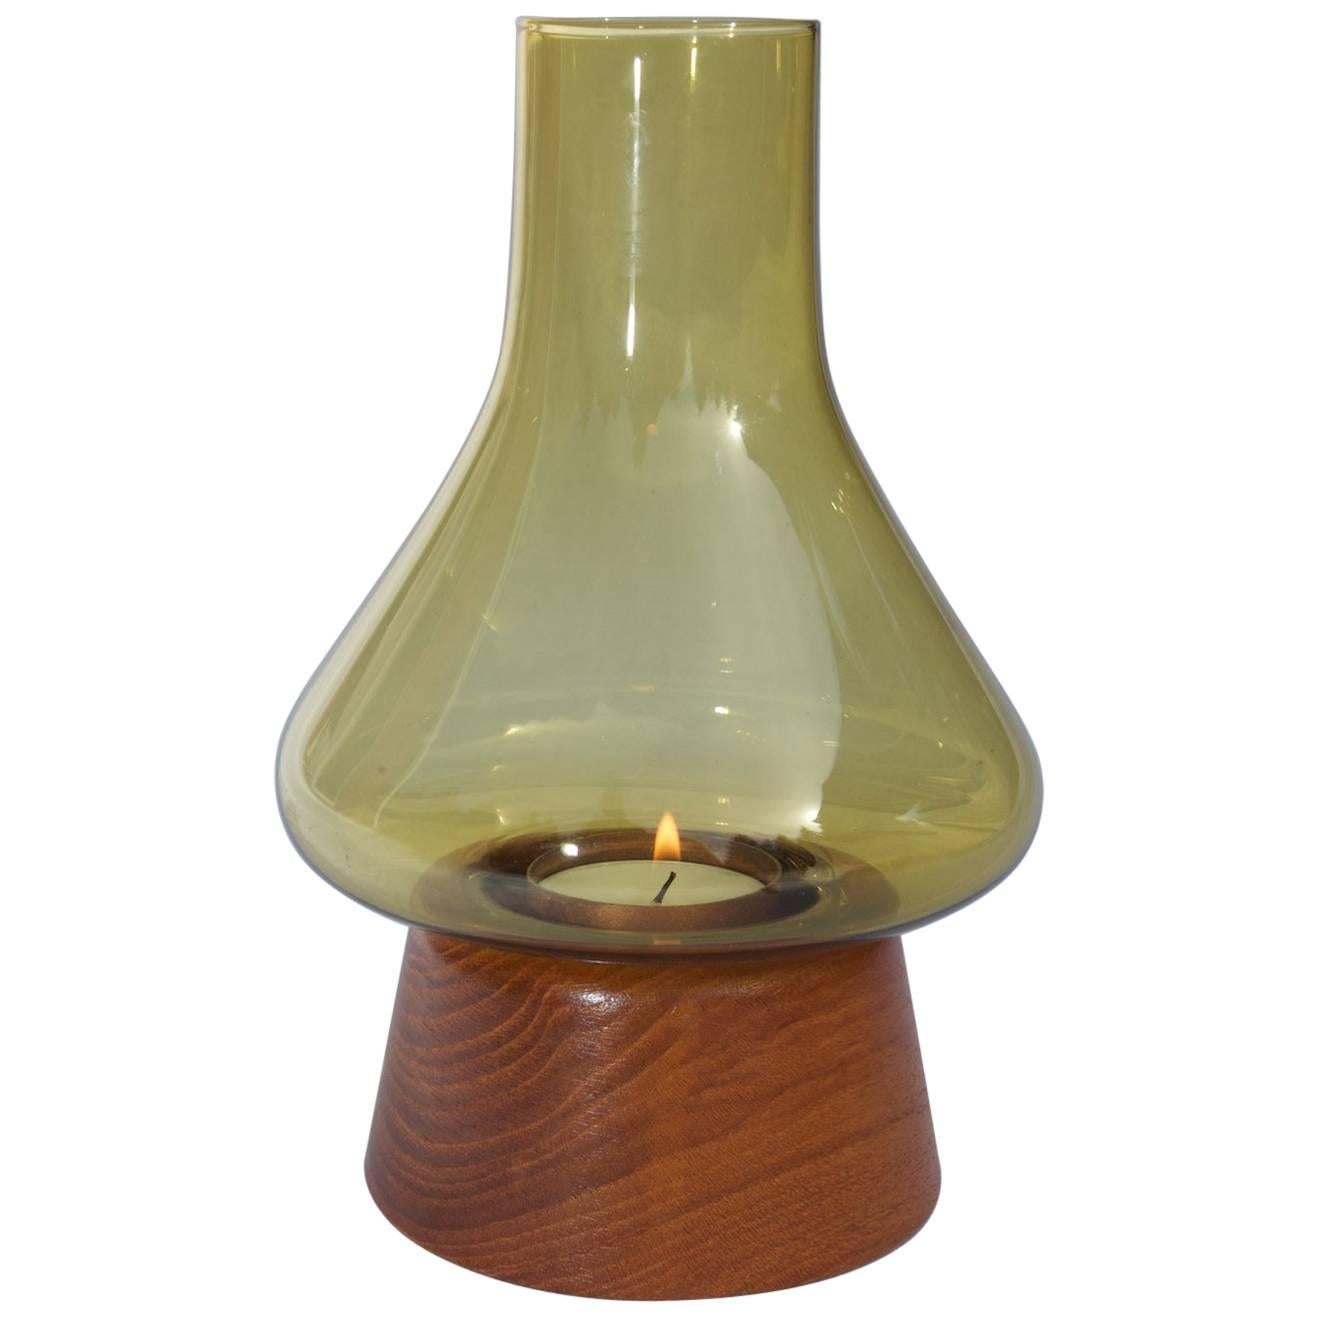 Candleholder, Teak, Glass and Copper by Karl Holmberg 1960s-1970s, Swedish For Sale